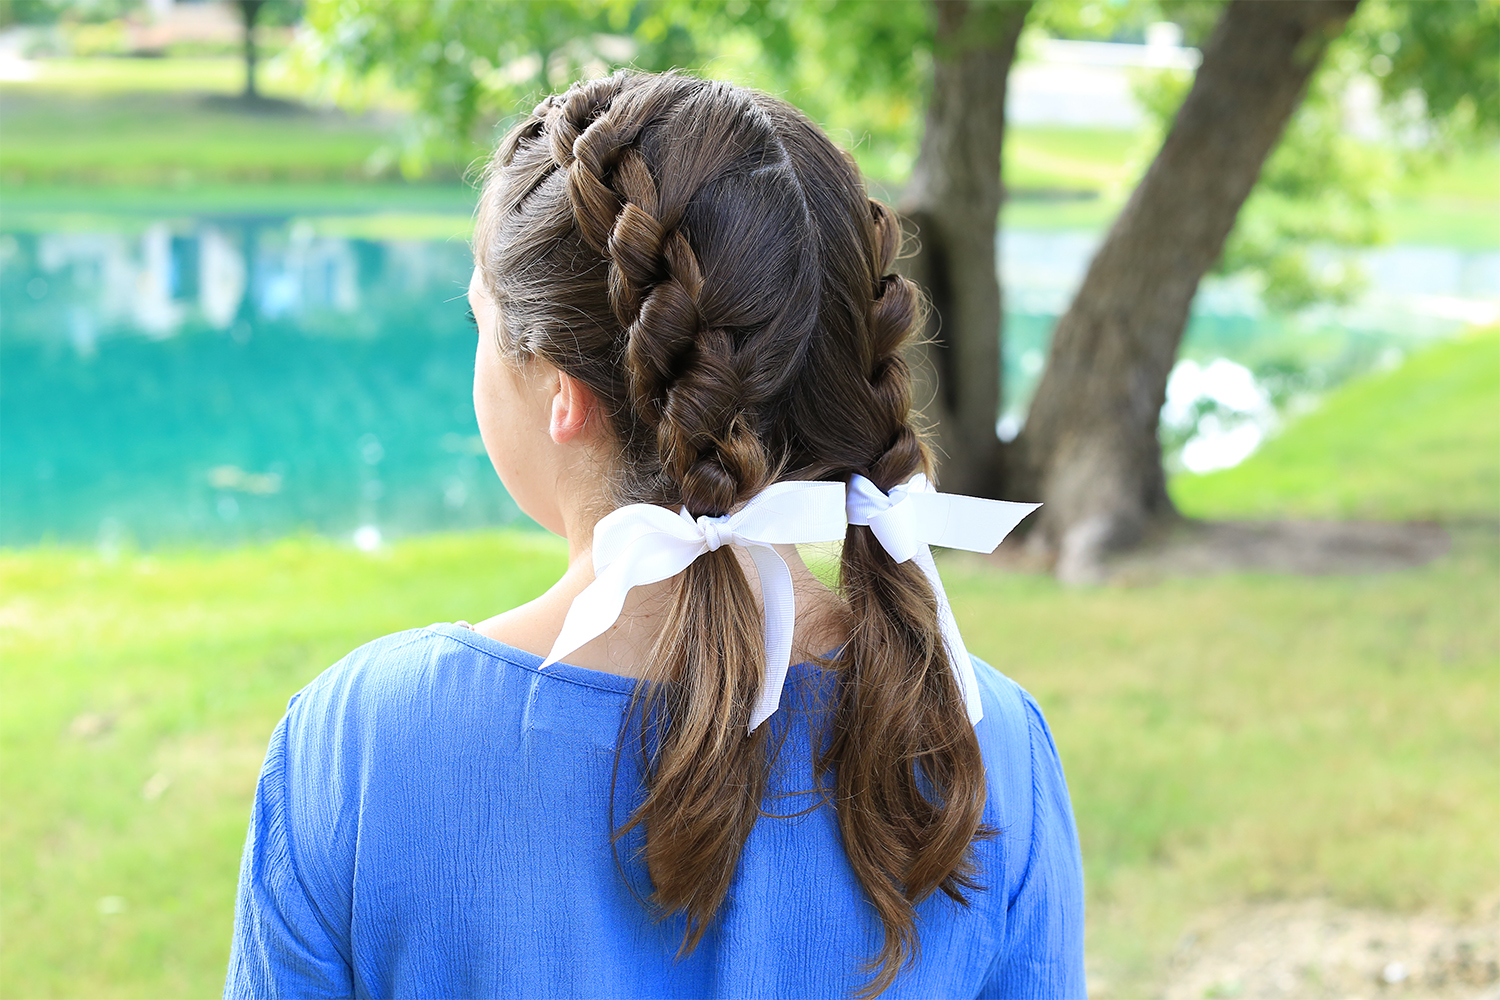 Double Knotted Braid Cute Girls Hairstyles.